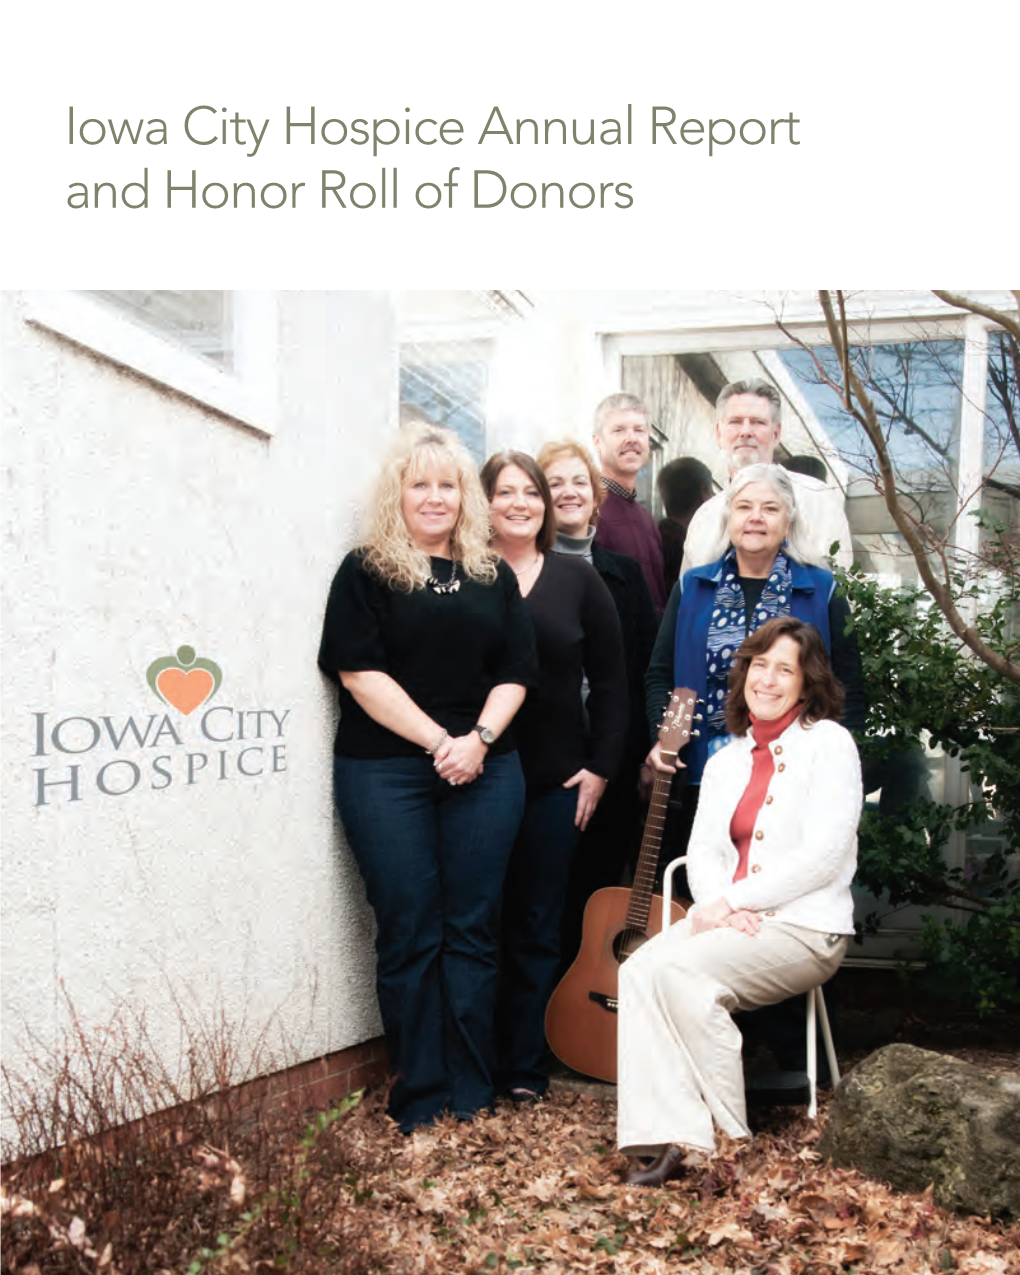 Iowa City Hospice Annual Report and Honor Roll of Donors